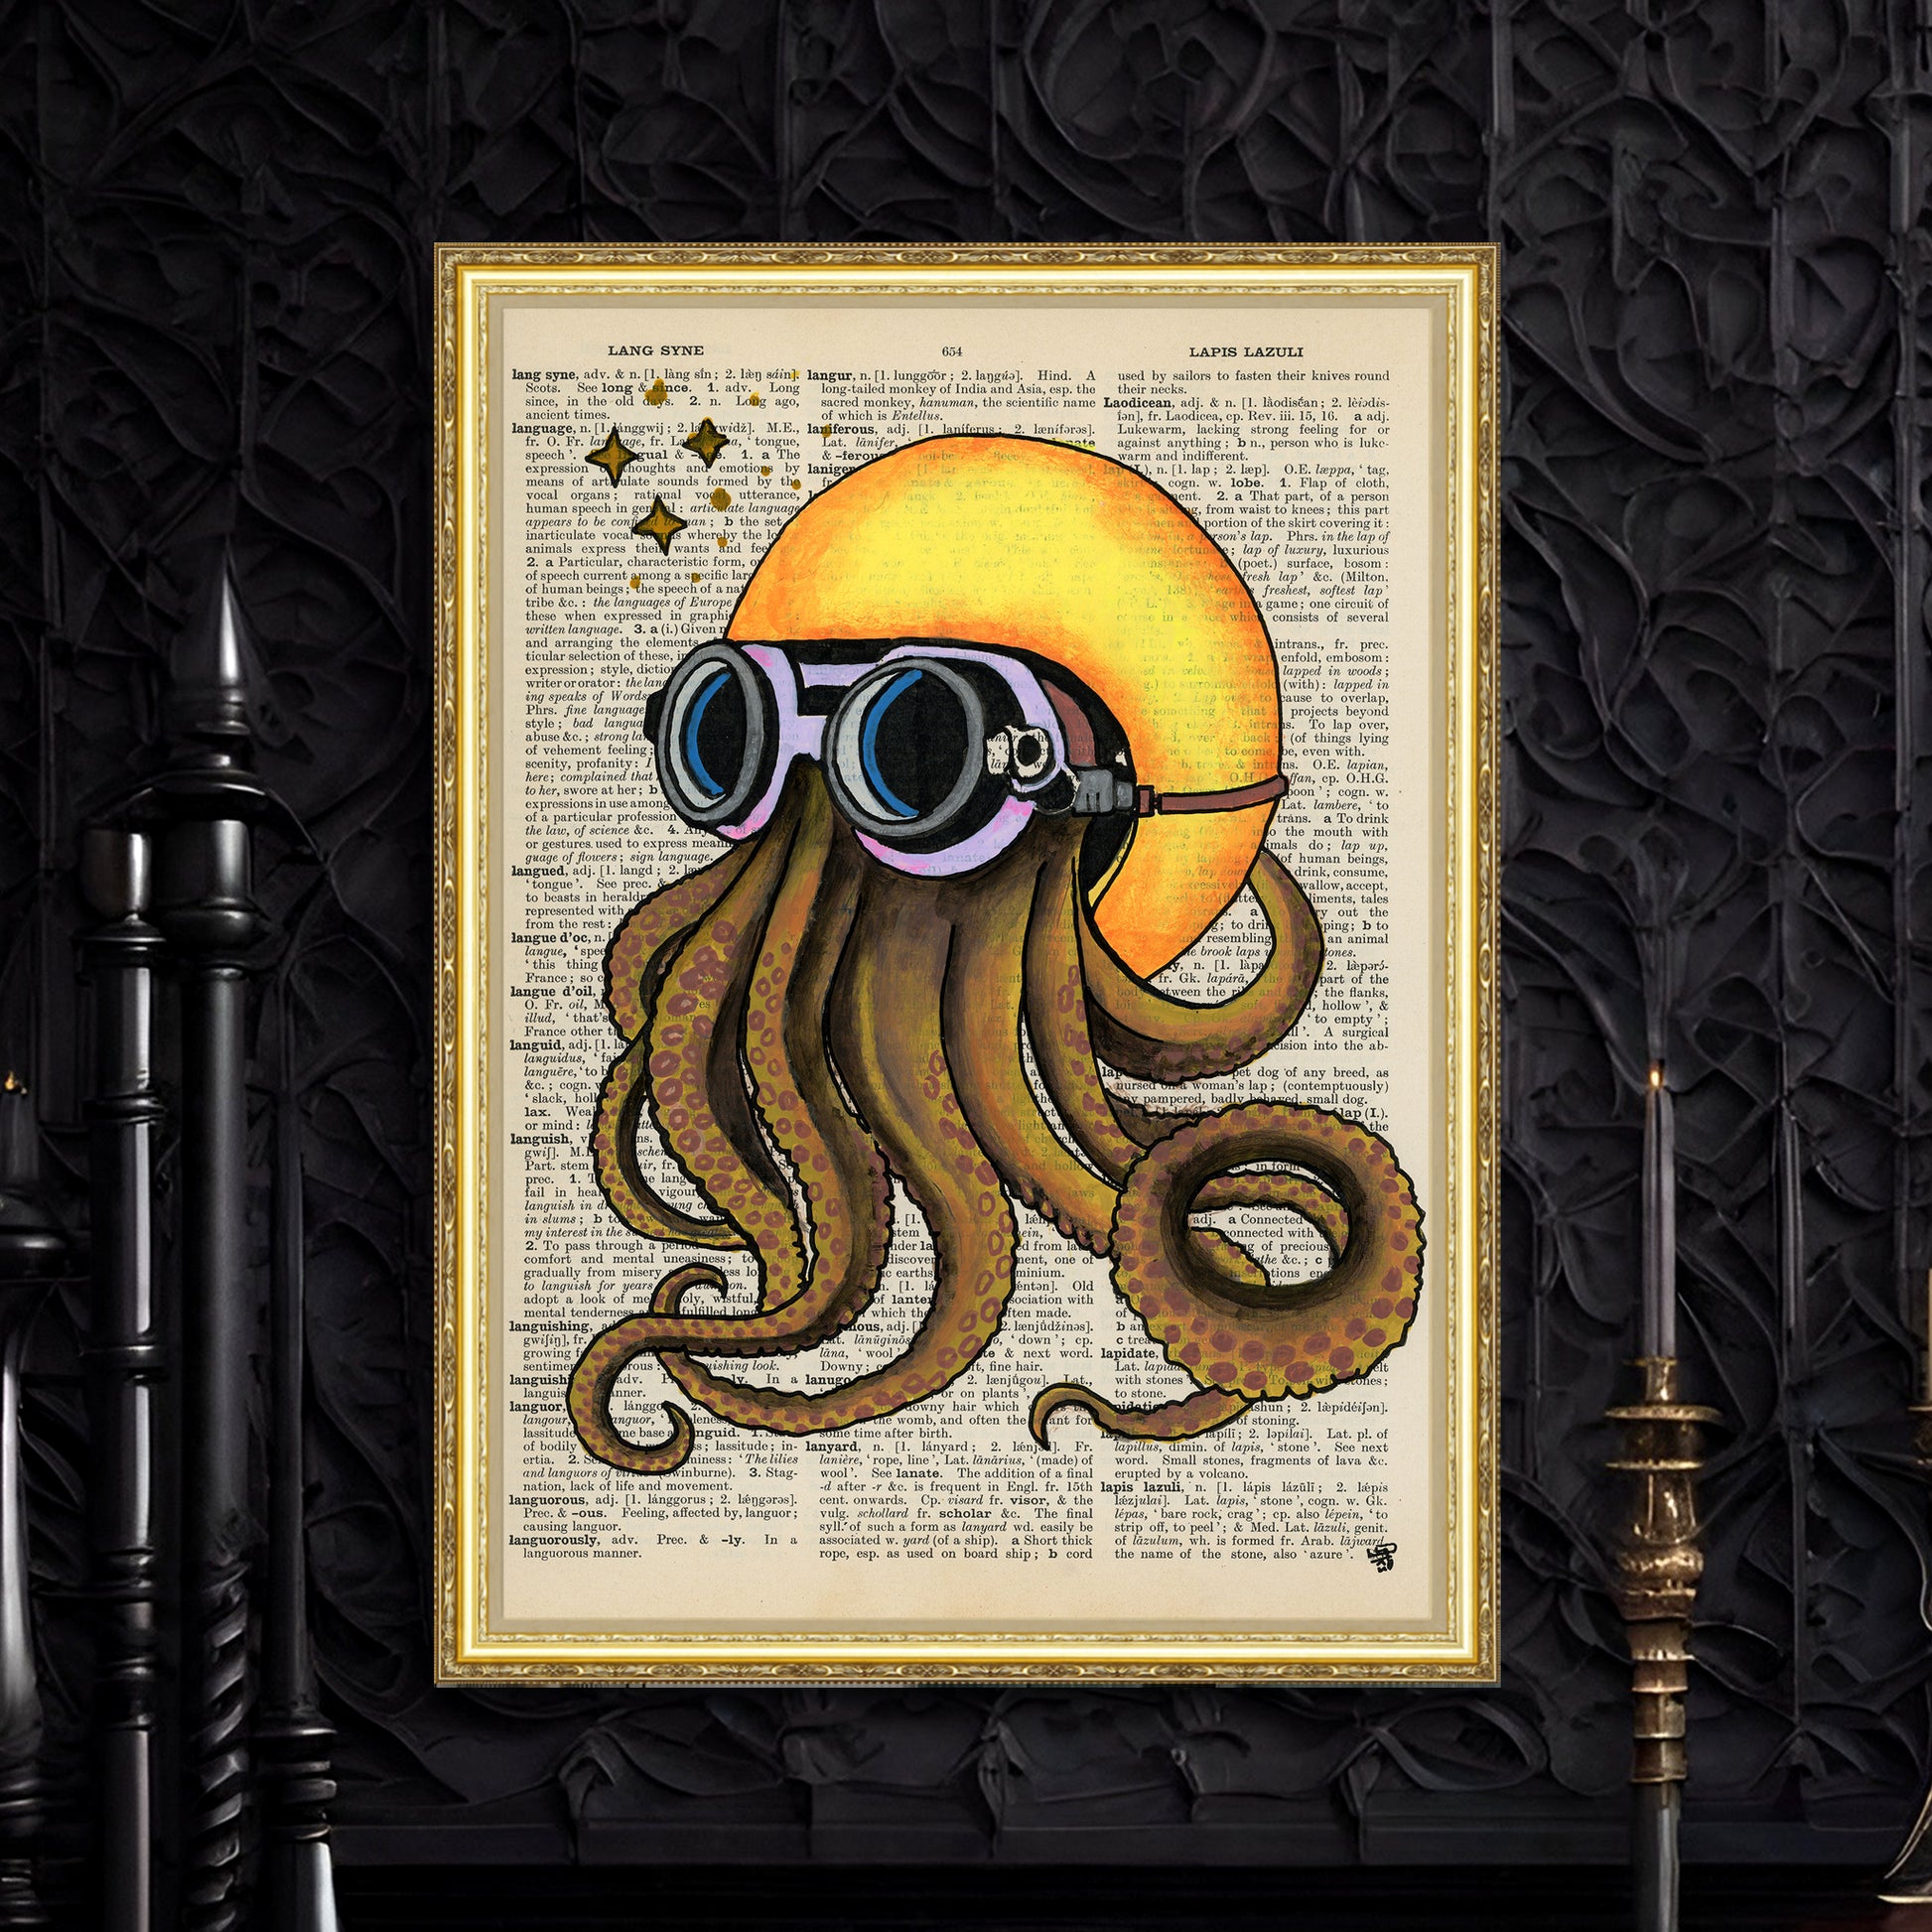 Humorous octopus biker art on a genuine vintage dictionary page, perfect for motorcycle enthusiasts.